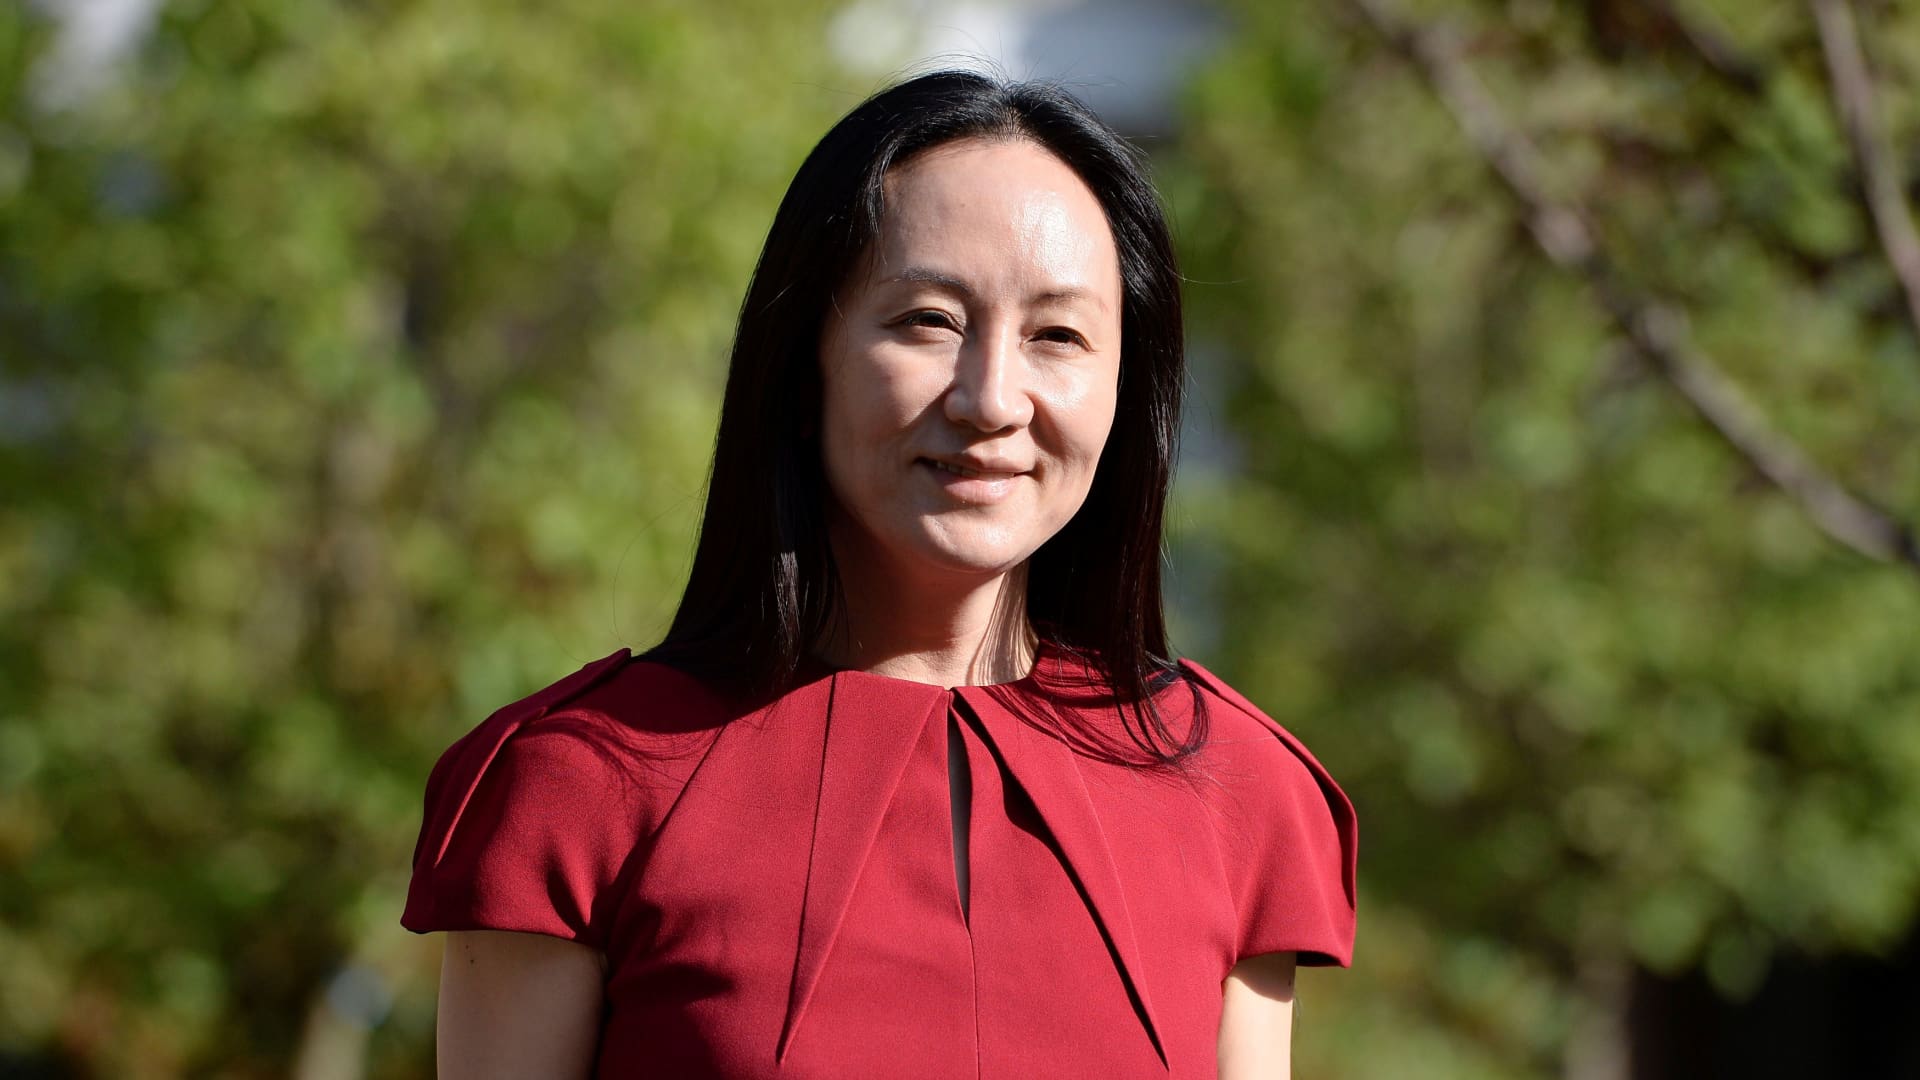 Huawei’s Meng Wanzhou claims implementing 5G to company was challenging